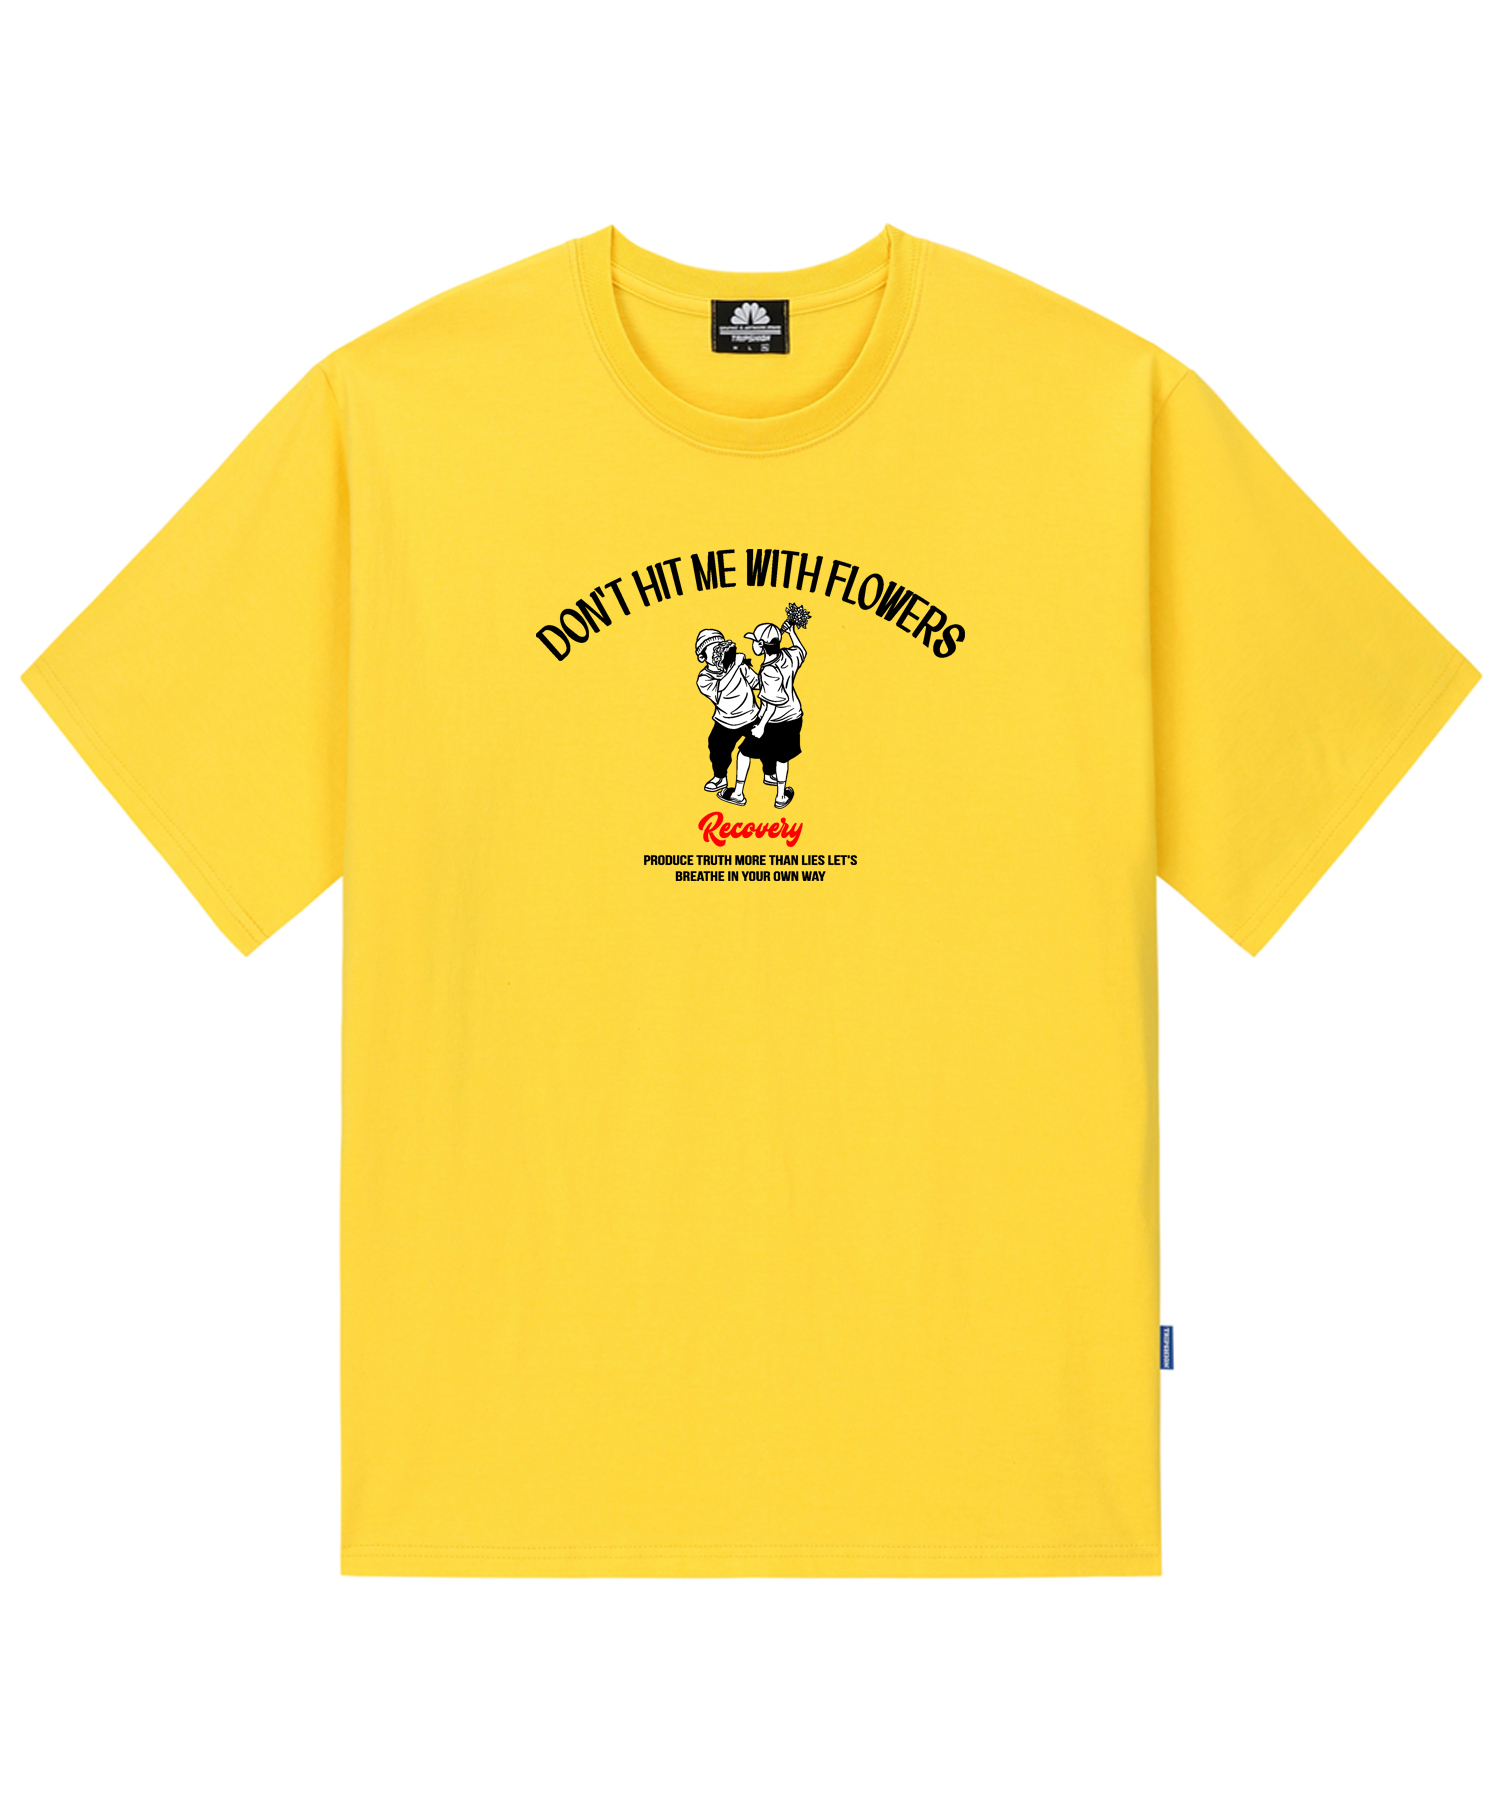 DON’T HIT ME WITH FLOWERS GRAPHIC T-SHIRTS - YELLOW